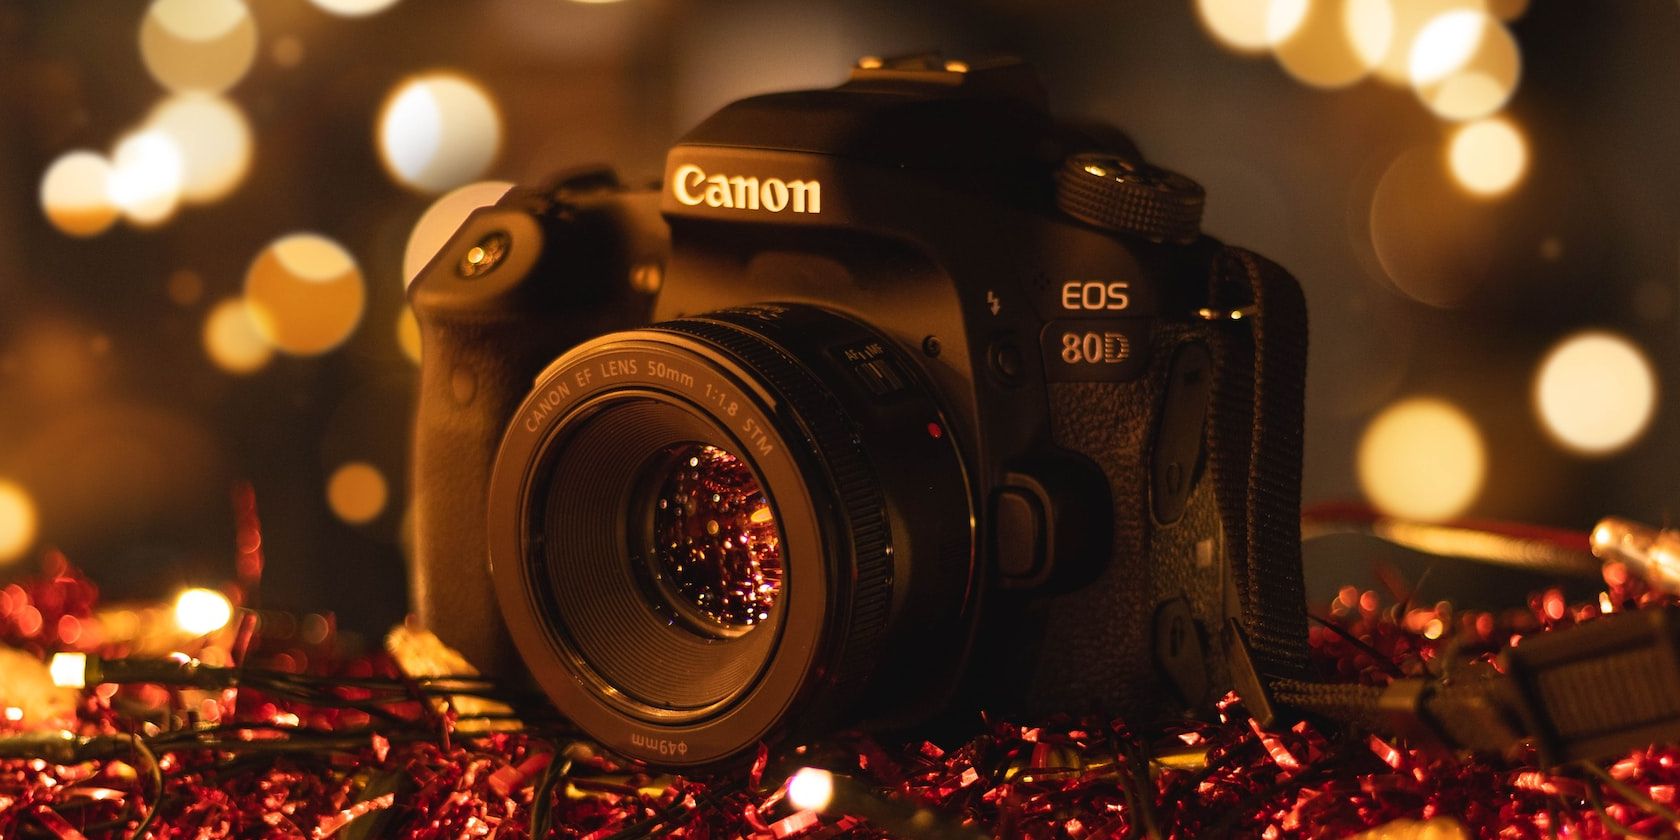 canon 80d on red ribbons with bokeh background